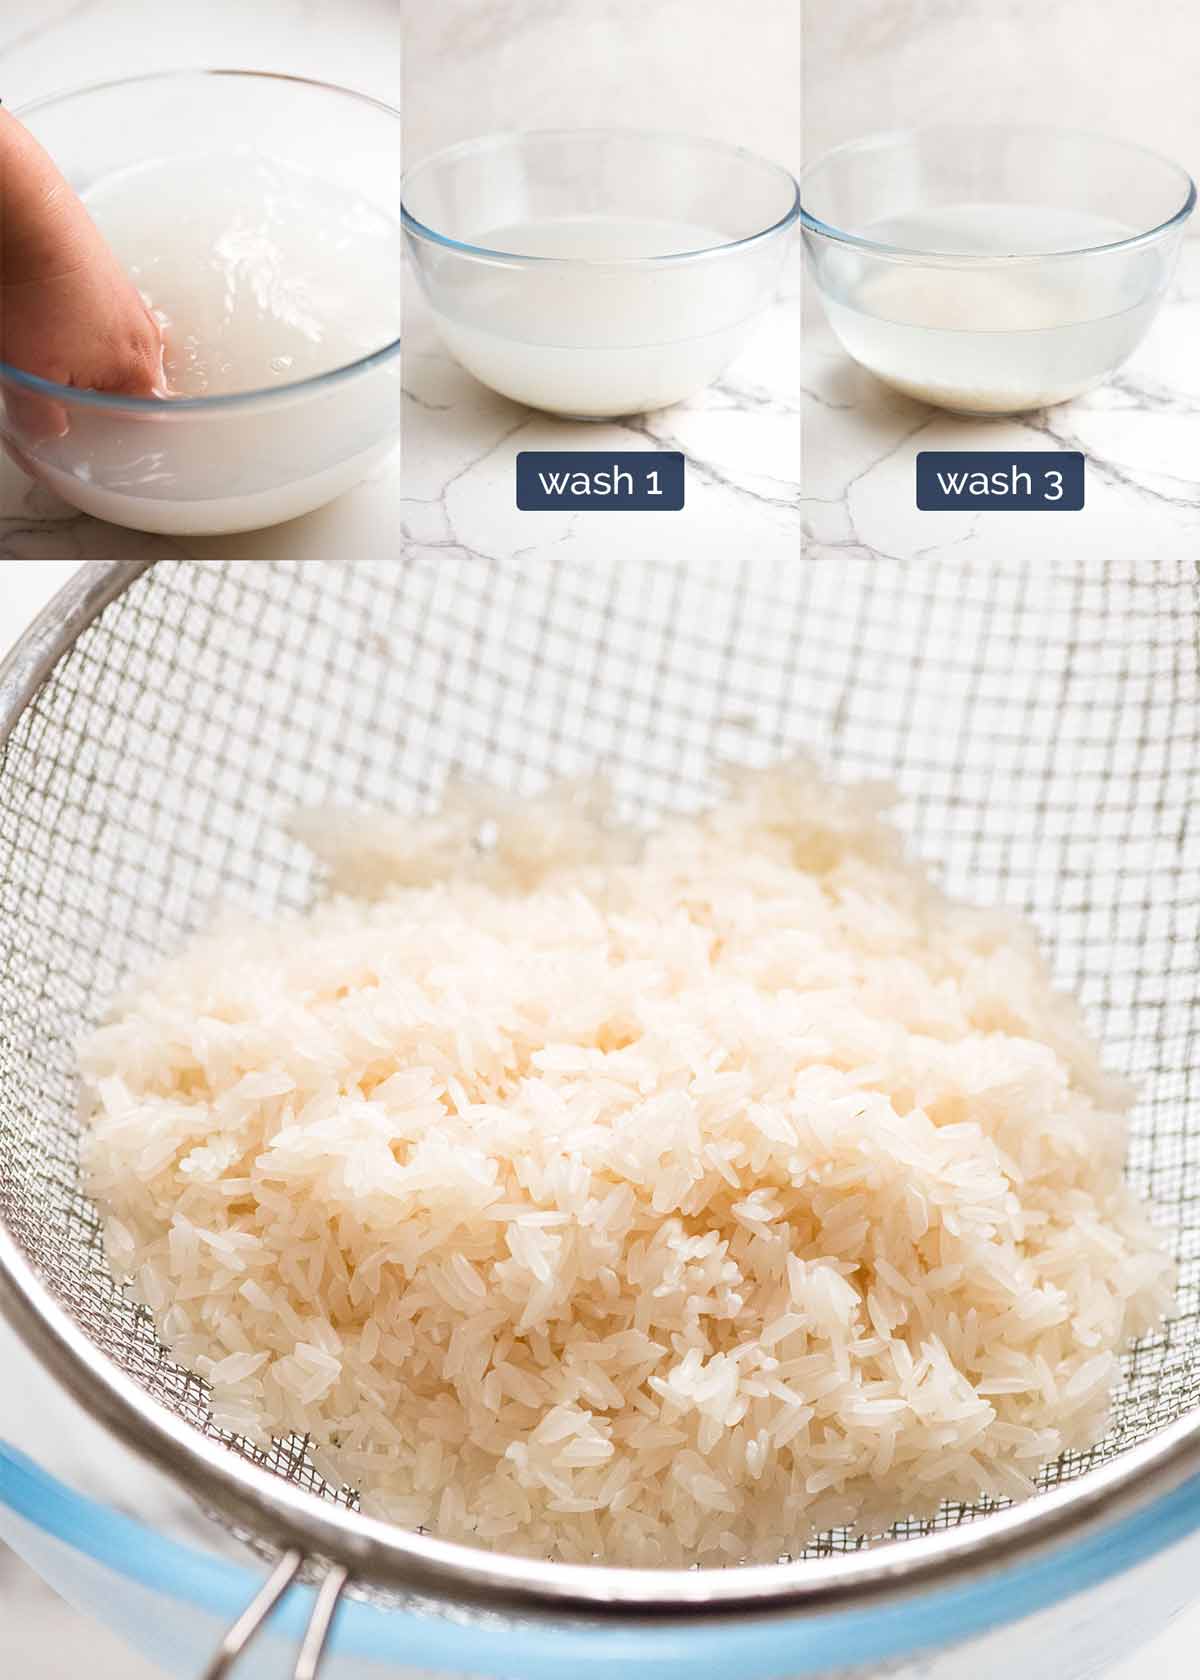 How to wash rice